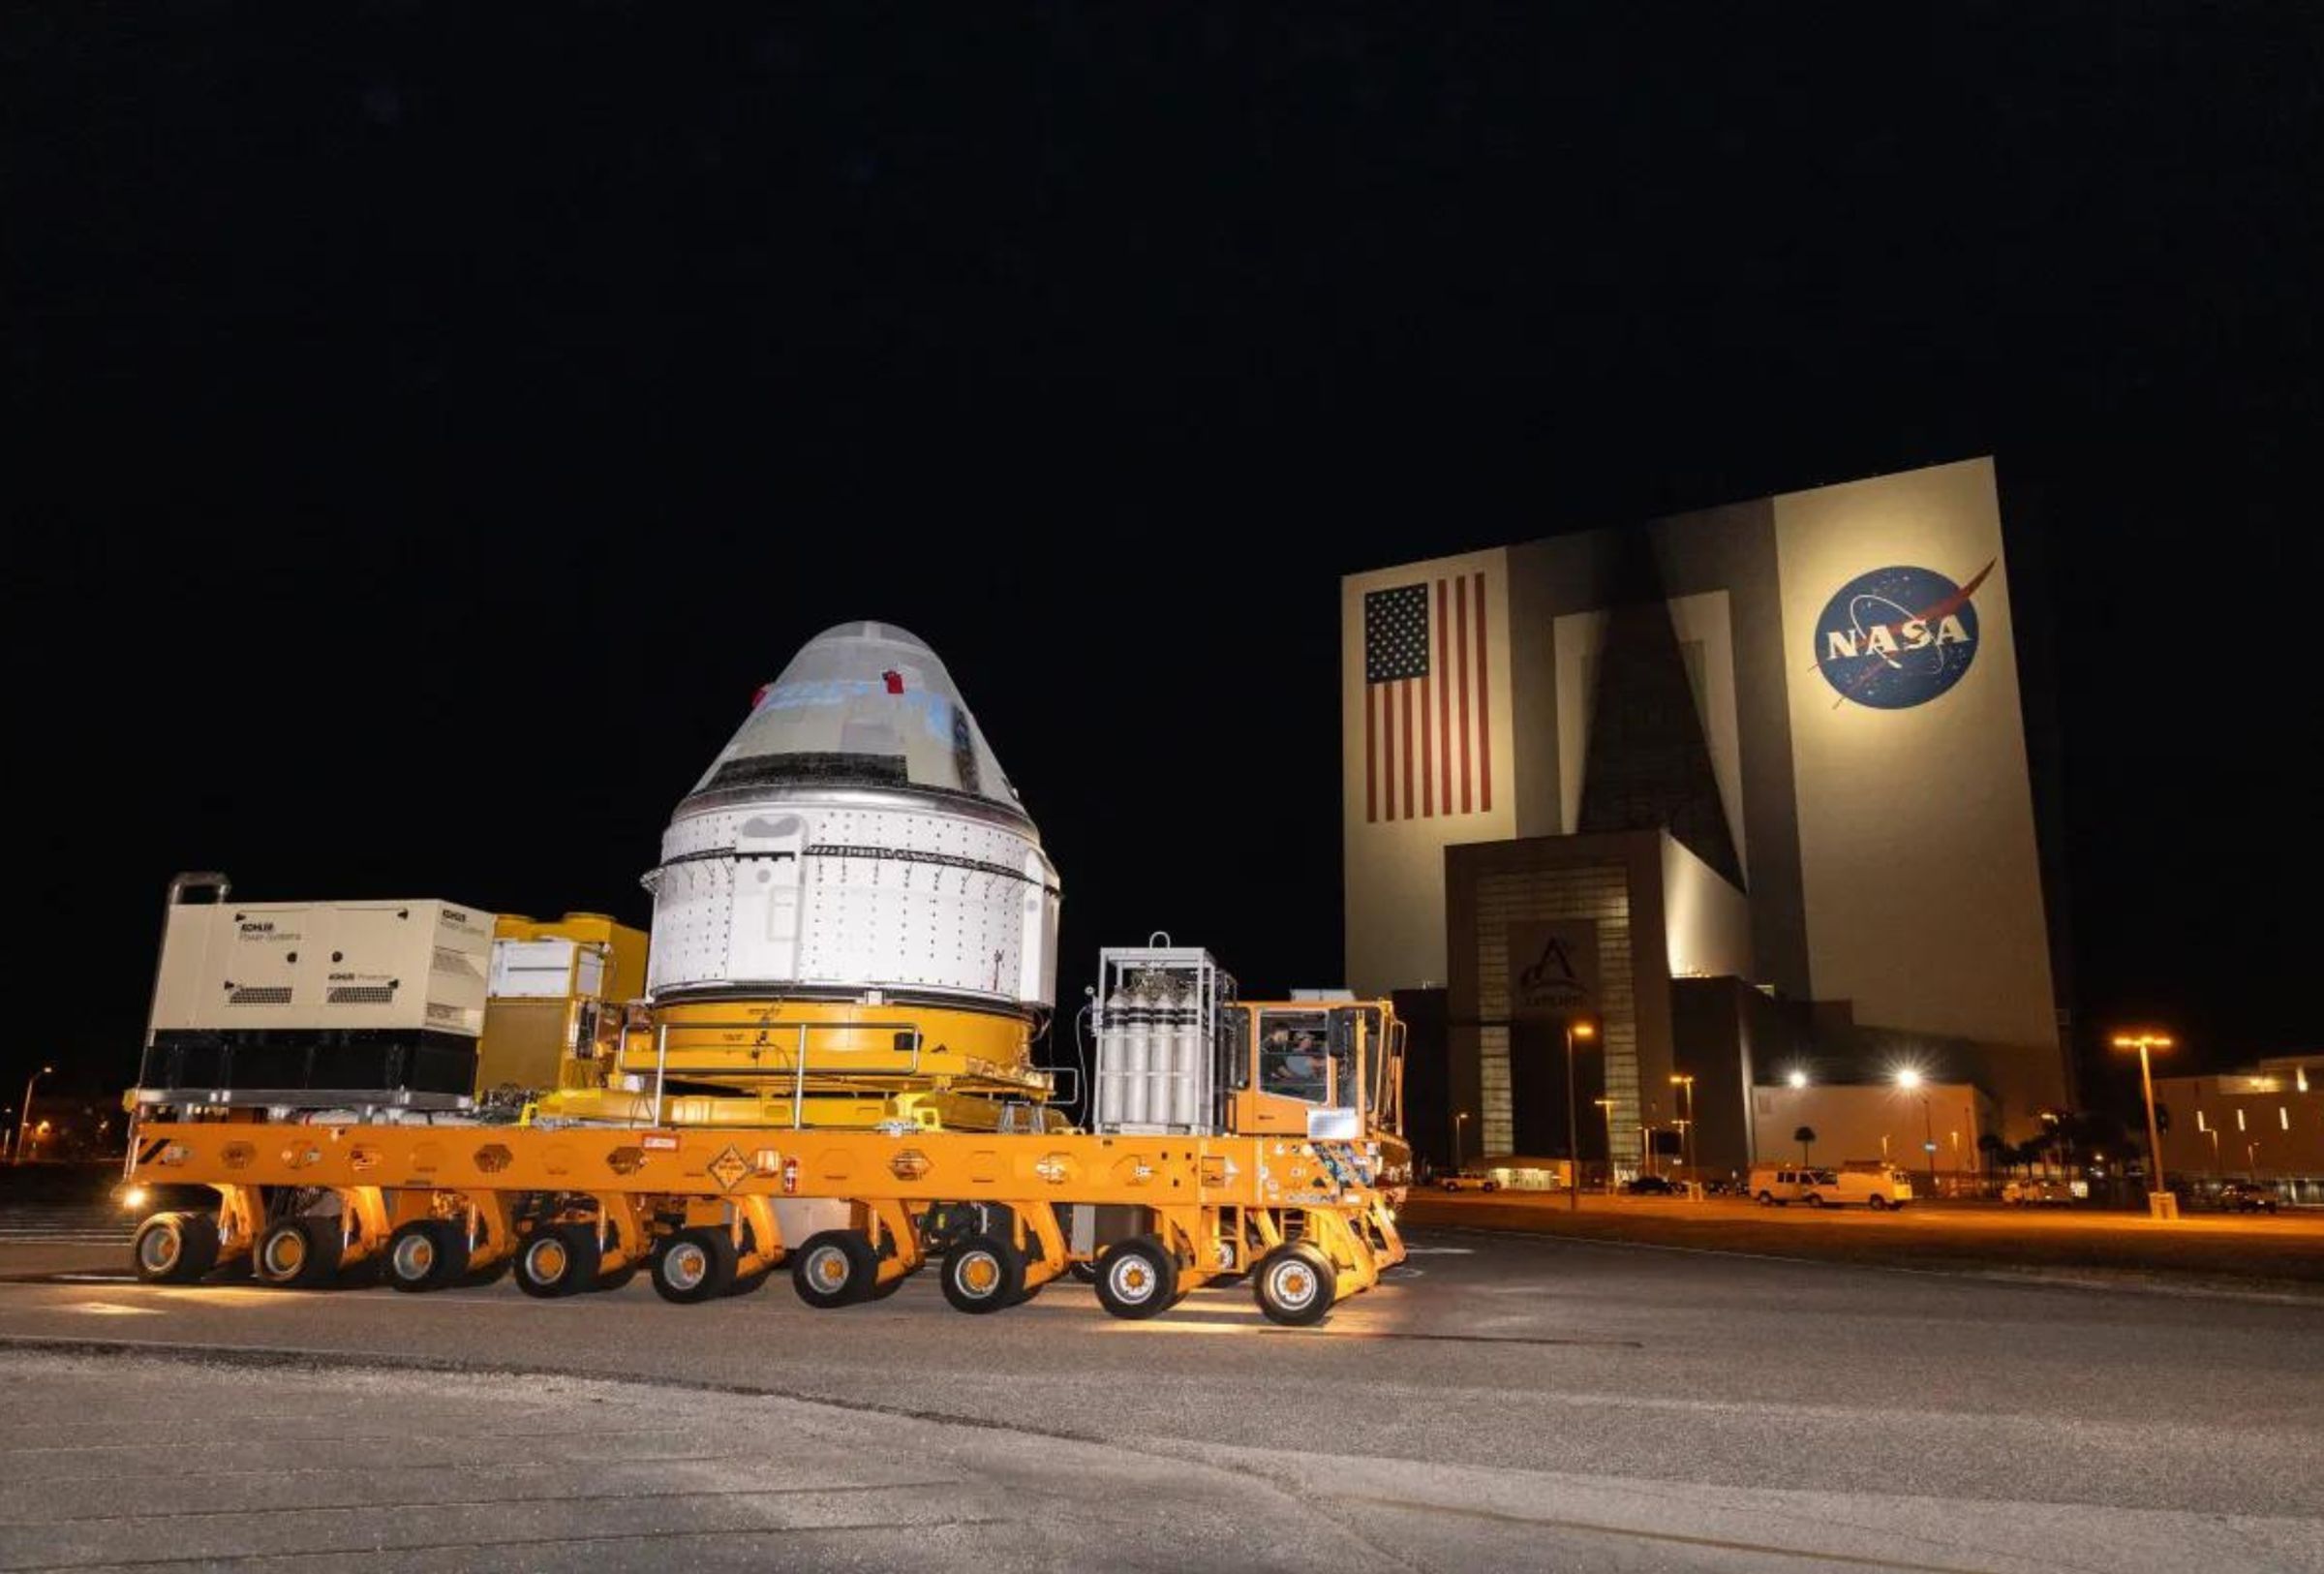 Boeing’s Starliner spacecraft, set to carry NASA astronauts Butch Wilmore and Suni Williams on the agency’s Boeing Crew Flight Test to the International Space Station, passes in front of the iconic Vehicle Assembly Building at NASA’s Kennedy Space Center in Florida.